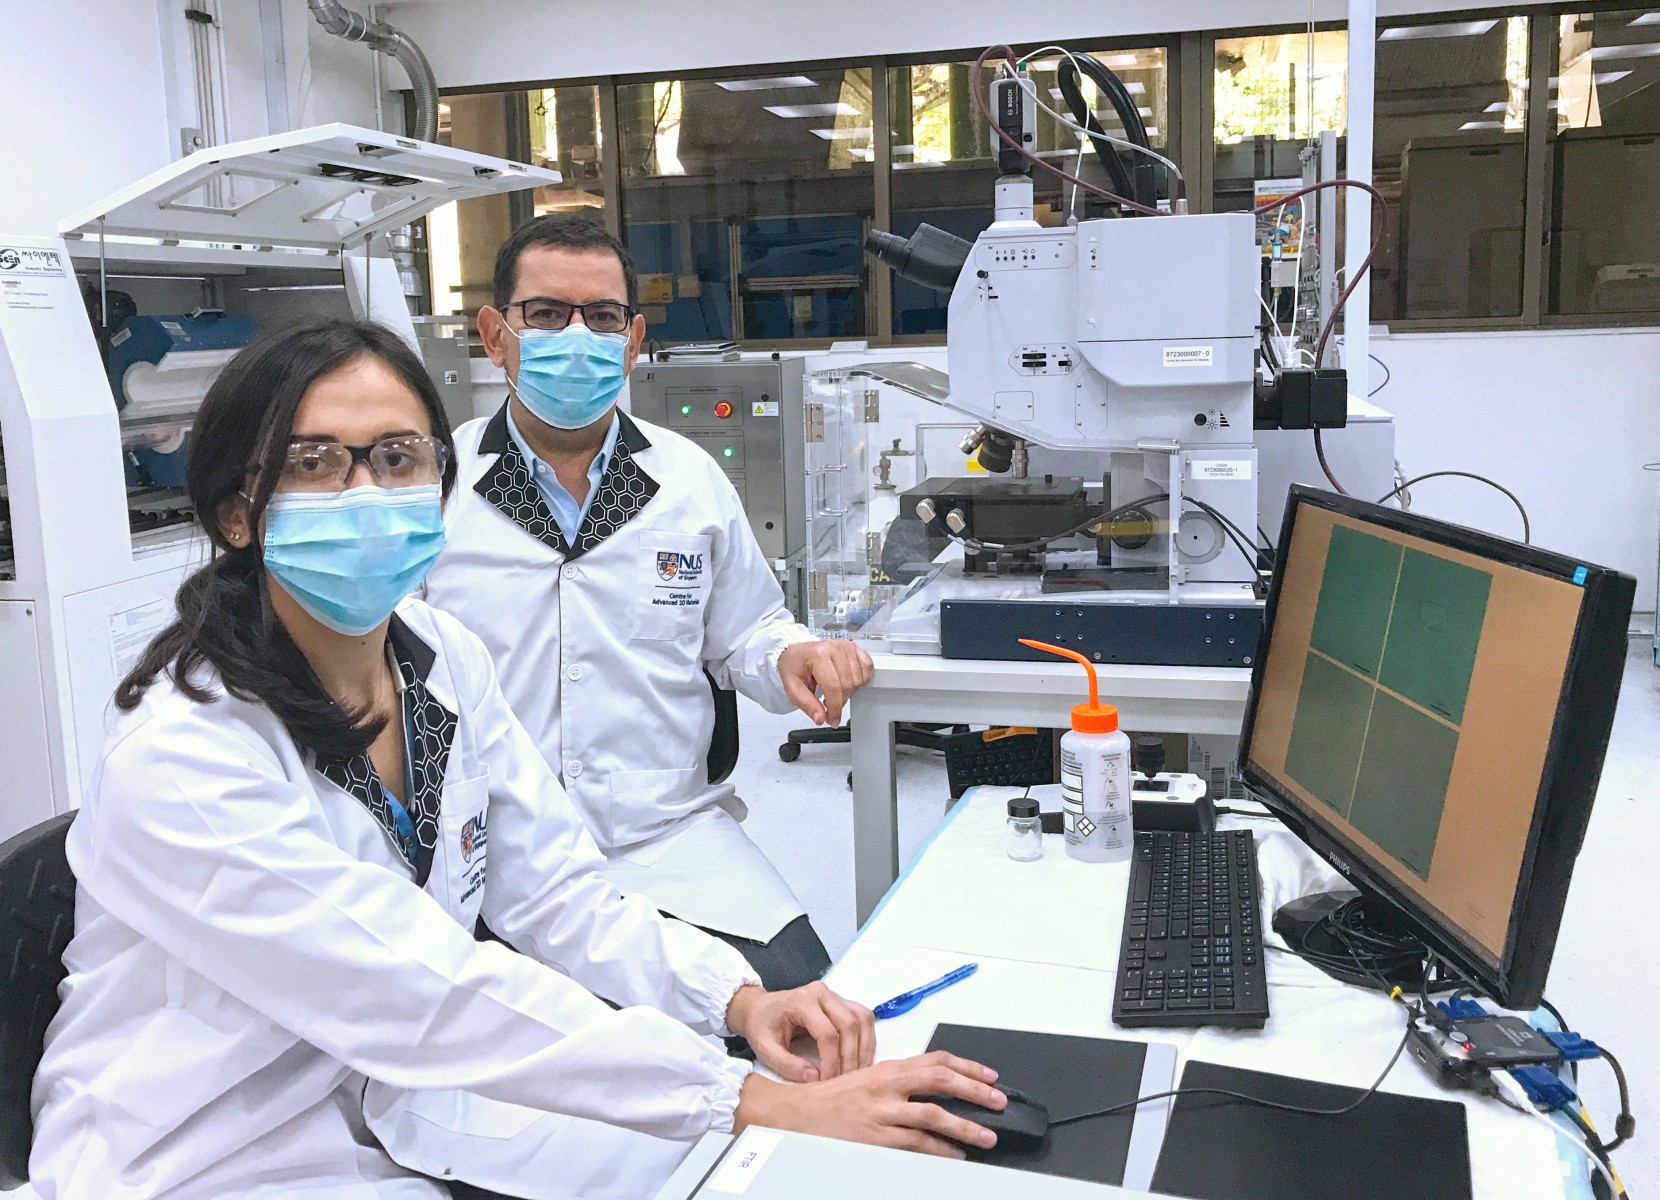 The team that created the 2D-electrolytes was led by Prof Antonio Castro Neto (right), Director of CA2DM. With him is Ms Mariana Costa (left), the first author of the ground-breaking publication.